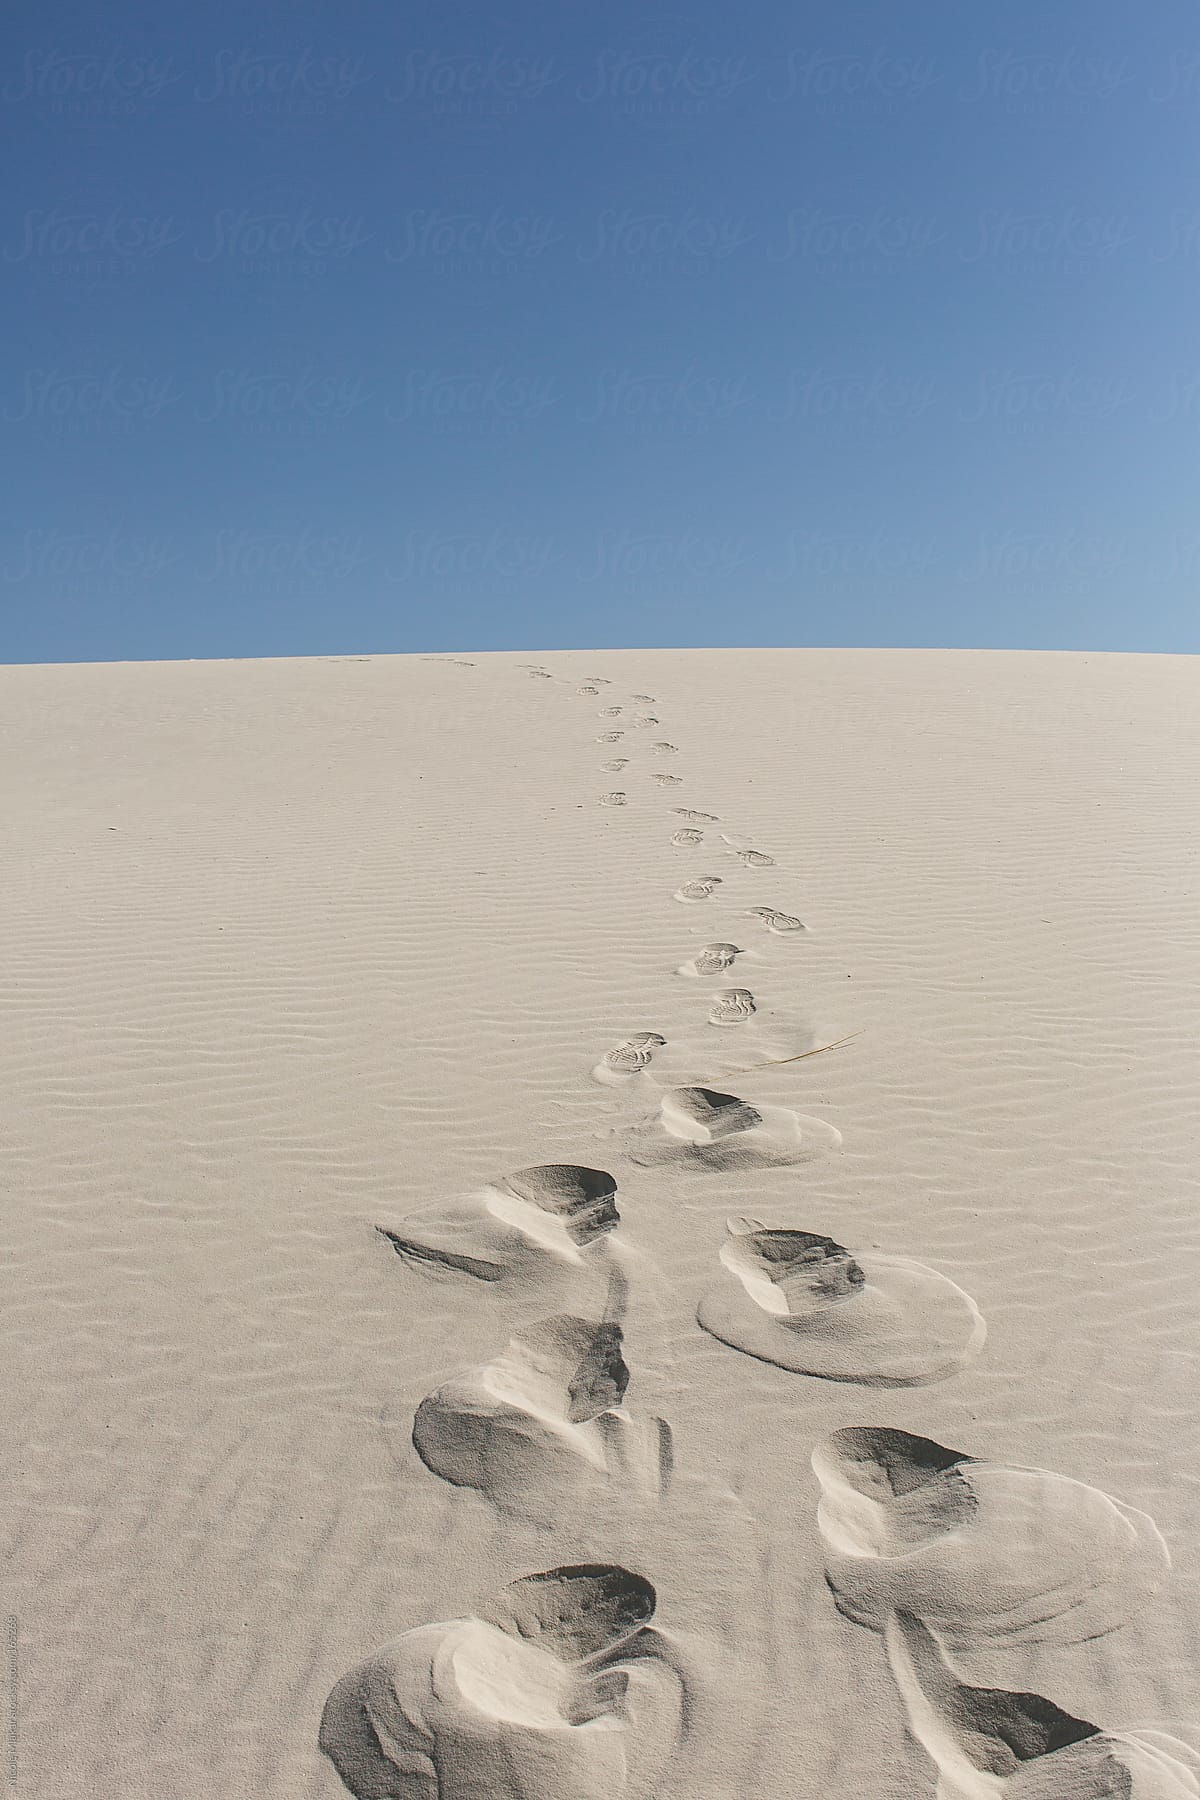 Foot prints at White Sands, New Mexico